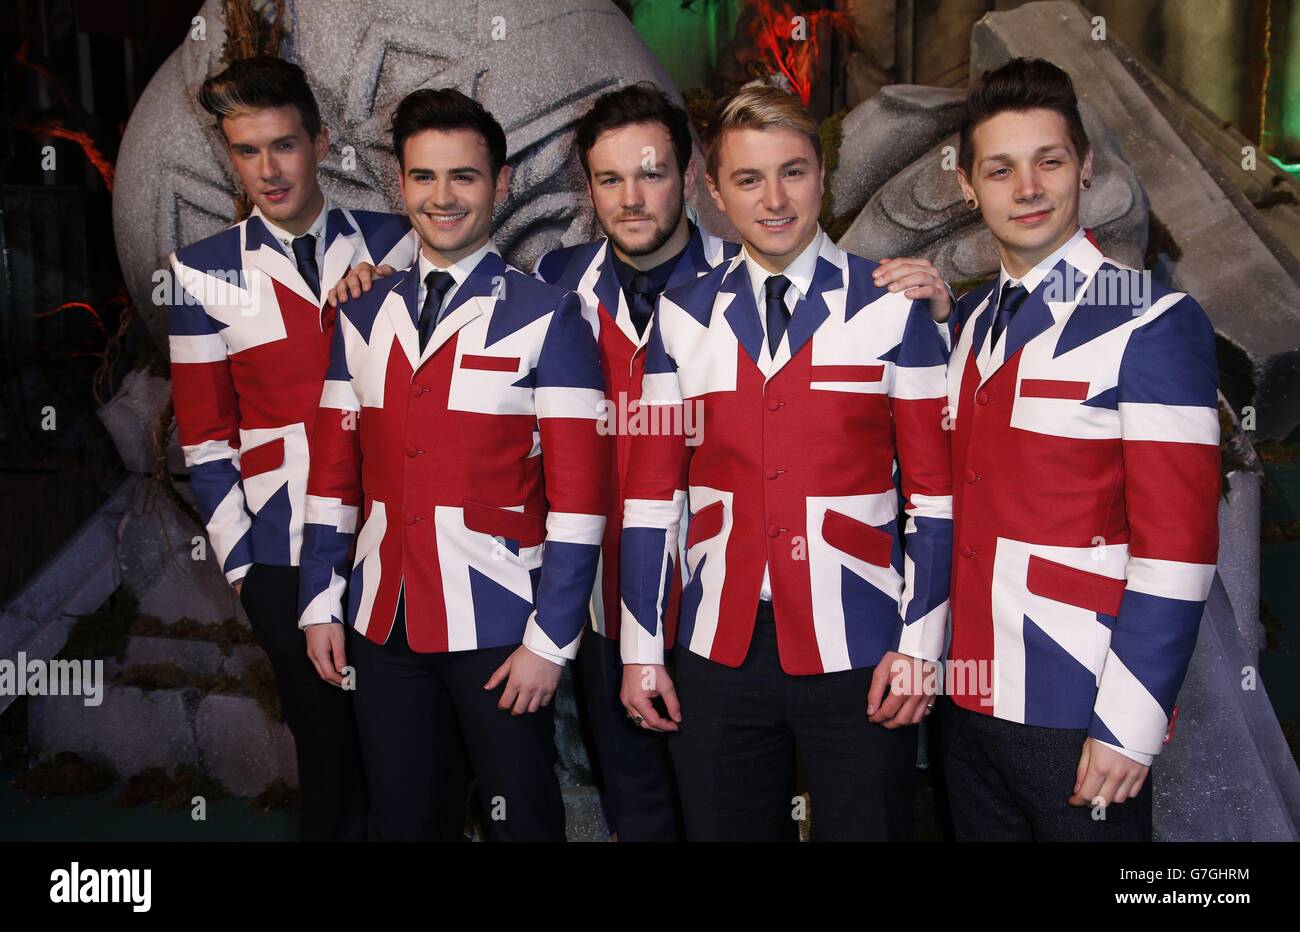 Collabro arrive on the green carpet for the premiere of The Hobbit: Battle of the Five Armies, at the Odeon Leicester Square in central London. Stock Photo